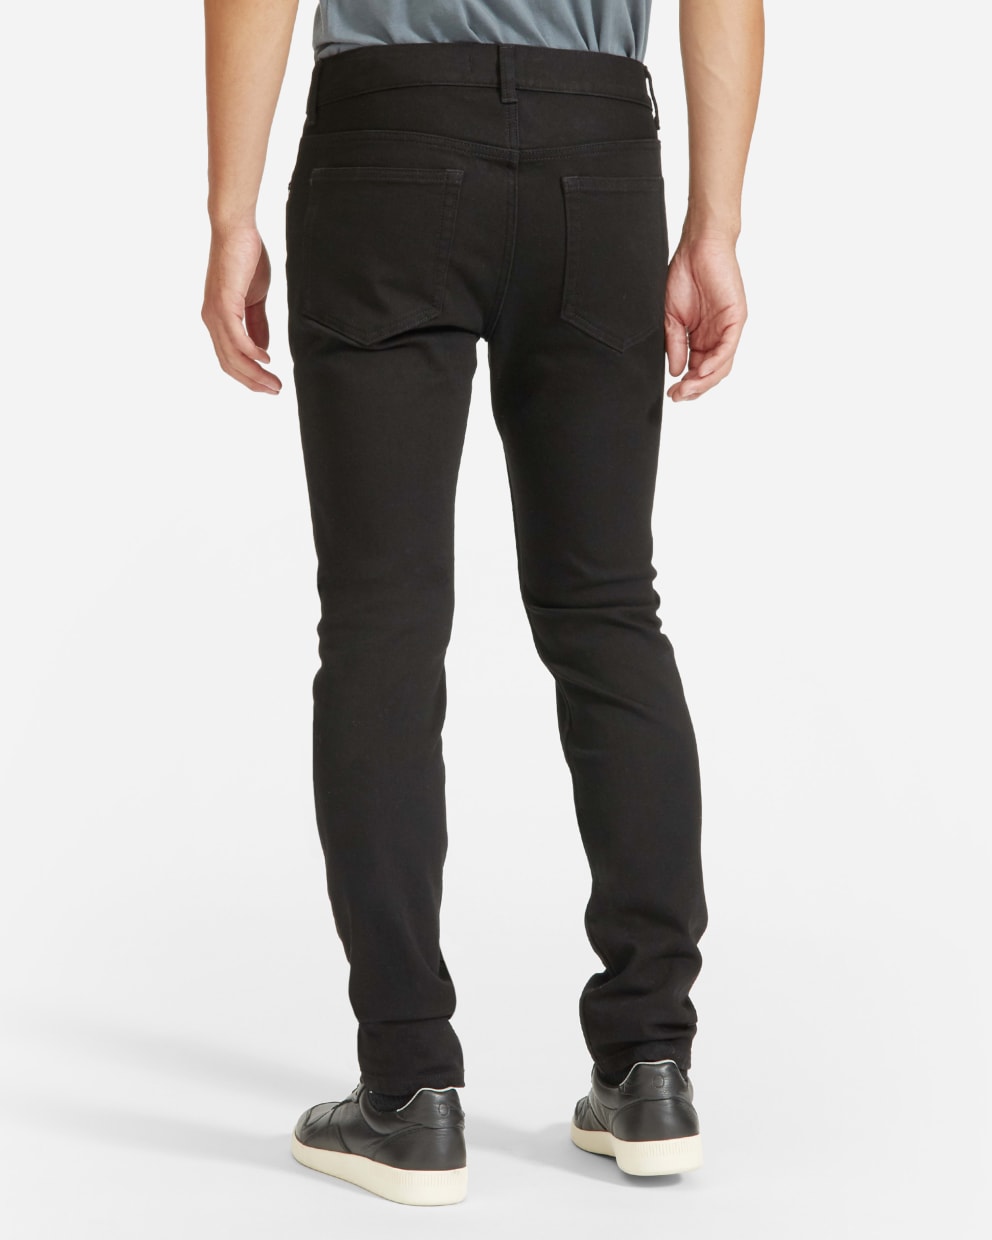 Shop latest styles of bootcut jeans for men – Levis India Store